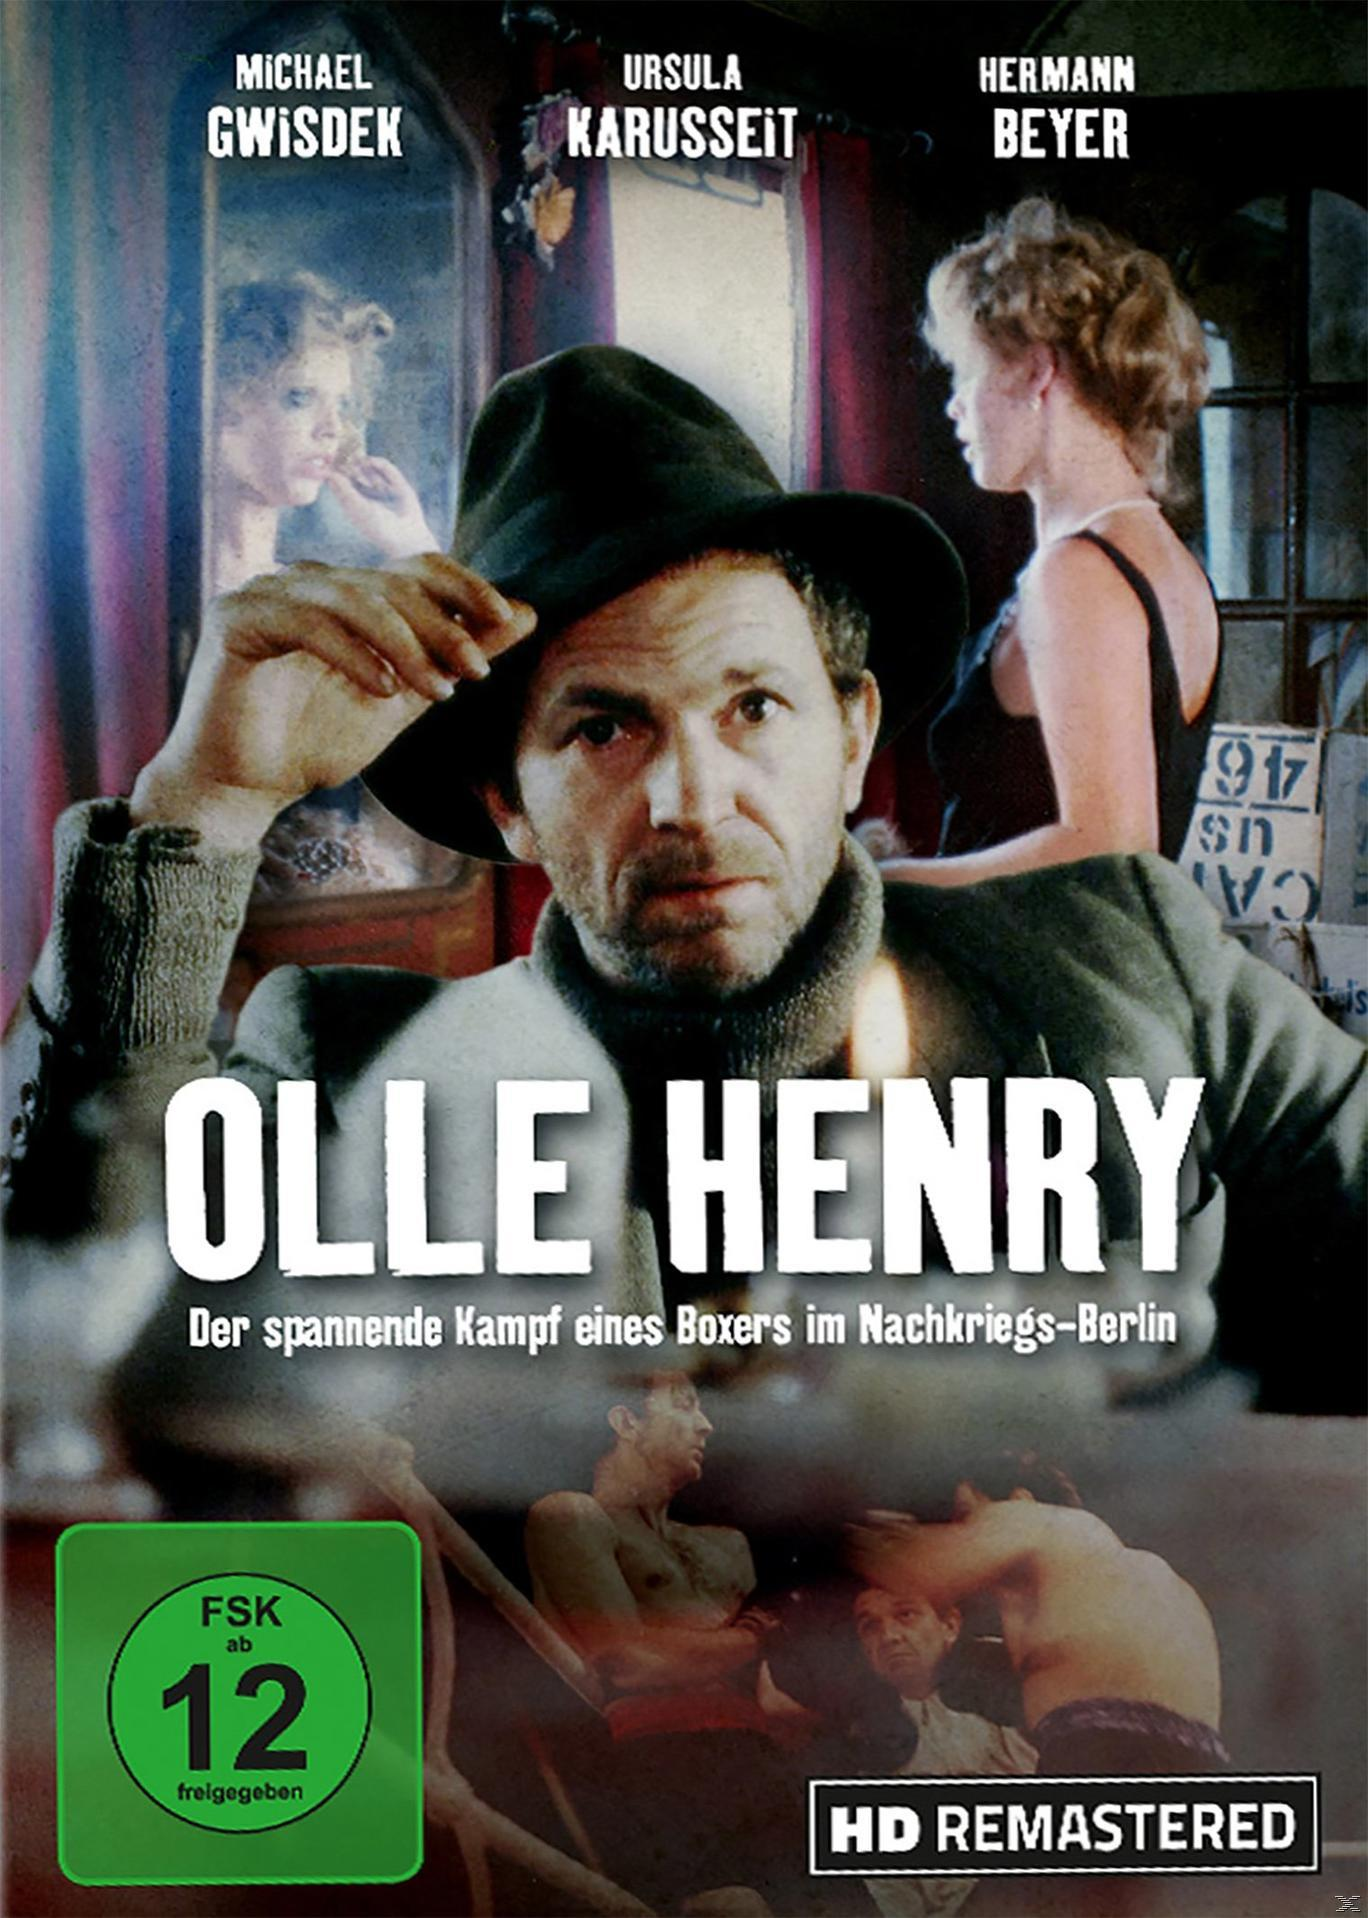 DVD (HD-Remastered) Henry Olle